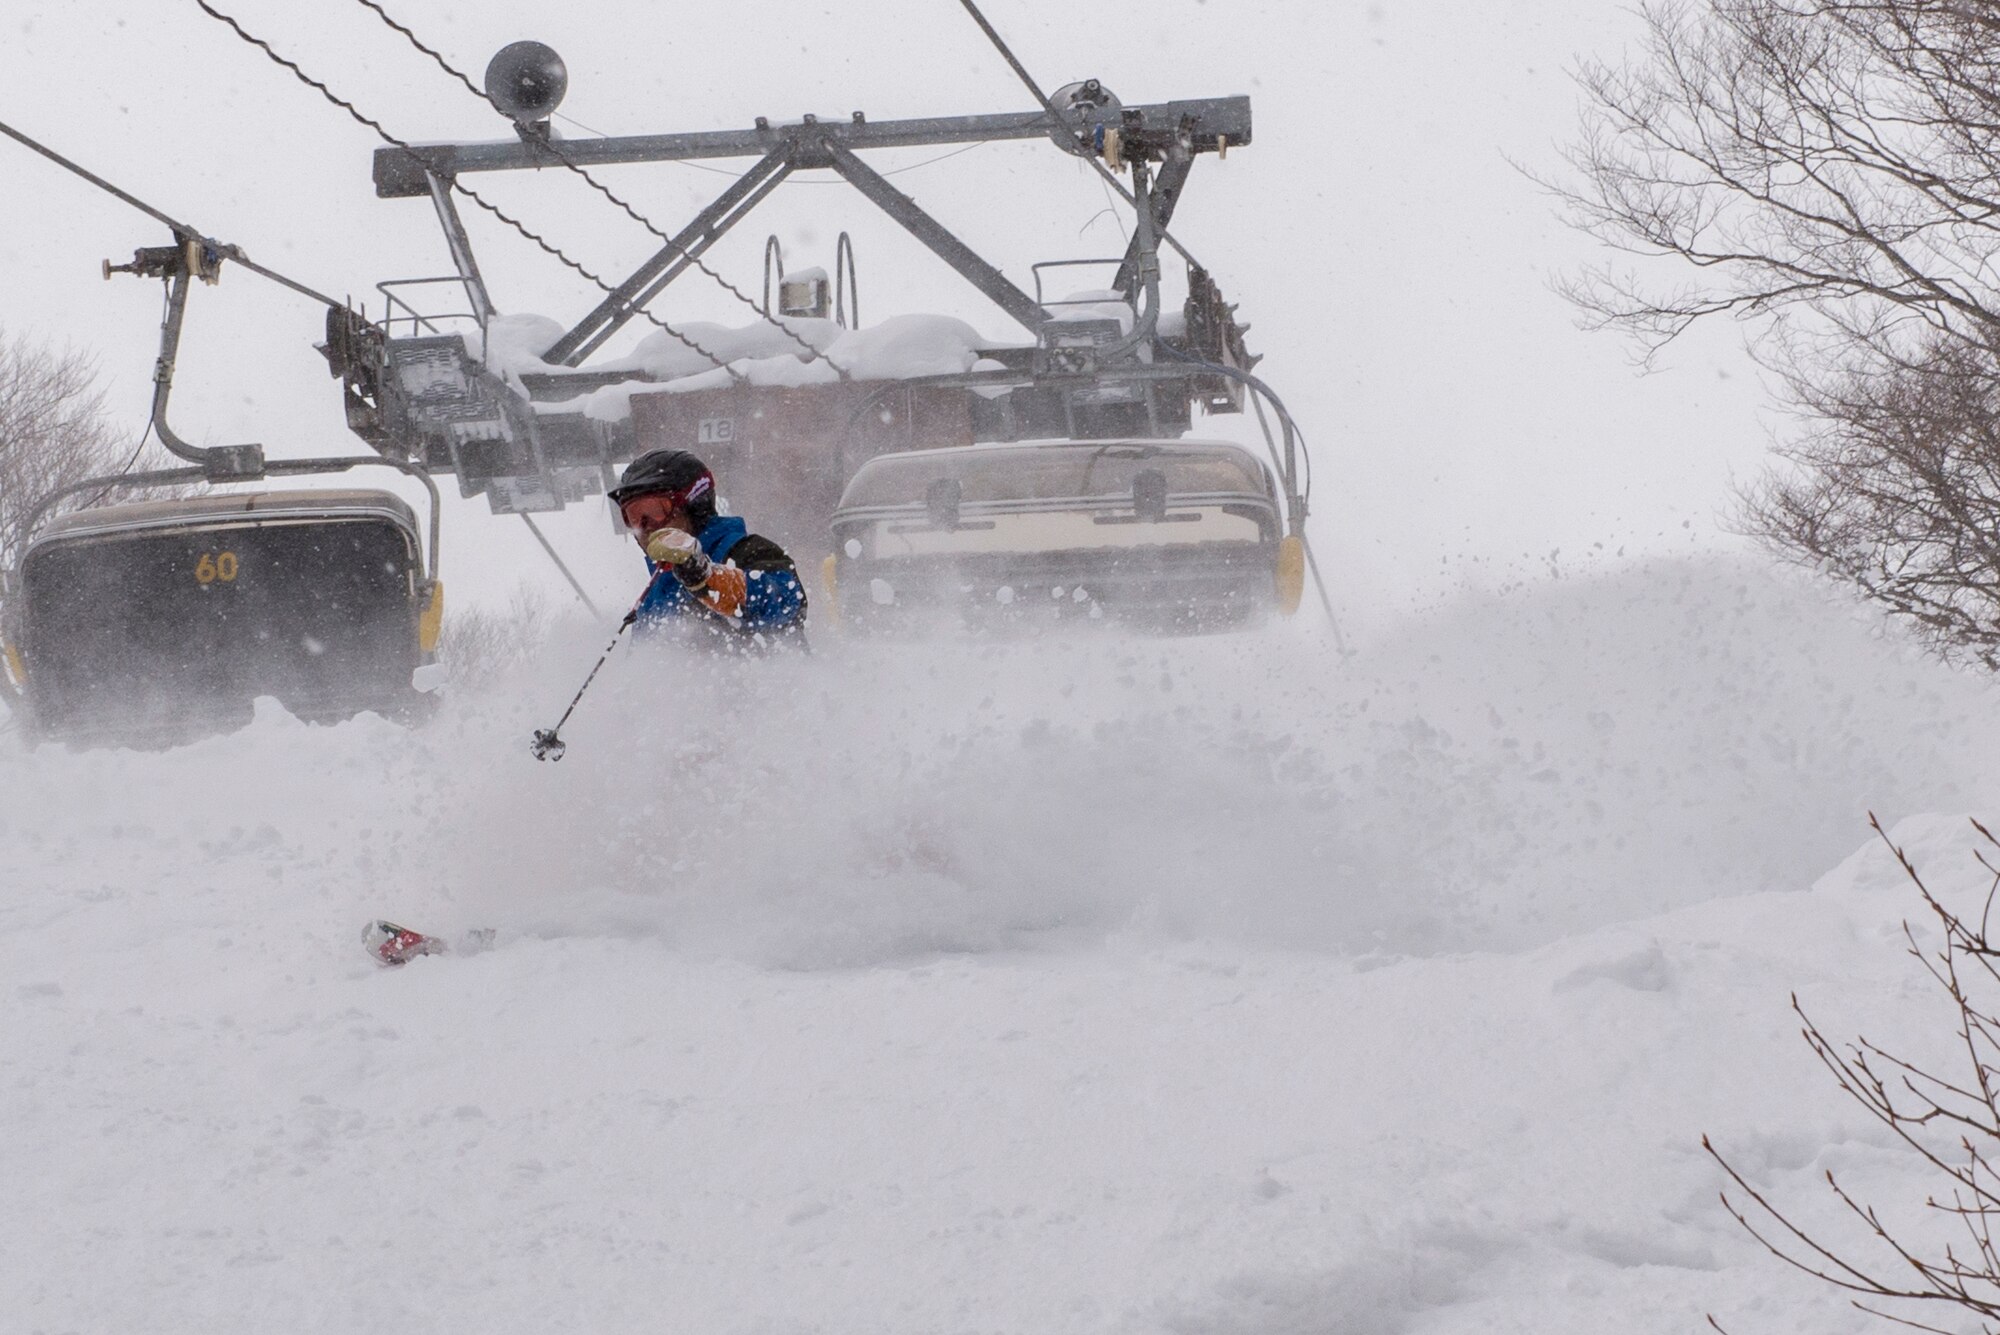 Yoshimasa Nakamura, 374th Force Support Squadron Outdoor Recreation recreation specialist, skis through fresh powder under a ski lift during a trip to Myoko-Suginohara ski resort Feb. 11, 2017, in the Niigata prefecture, Japan. Yoshi guides Outdoor Recreation customers on trips across Japan, providing guidance and knowledge on the activities and locations. (U.S. Air Force Photos by Airman 1st Class Donald Hudson)